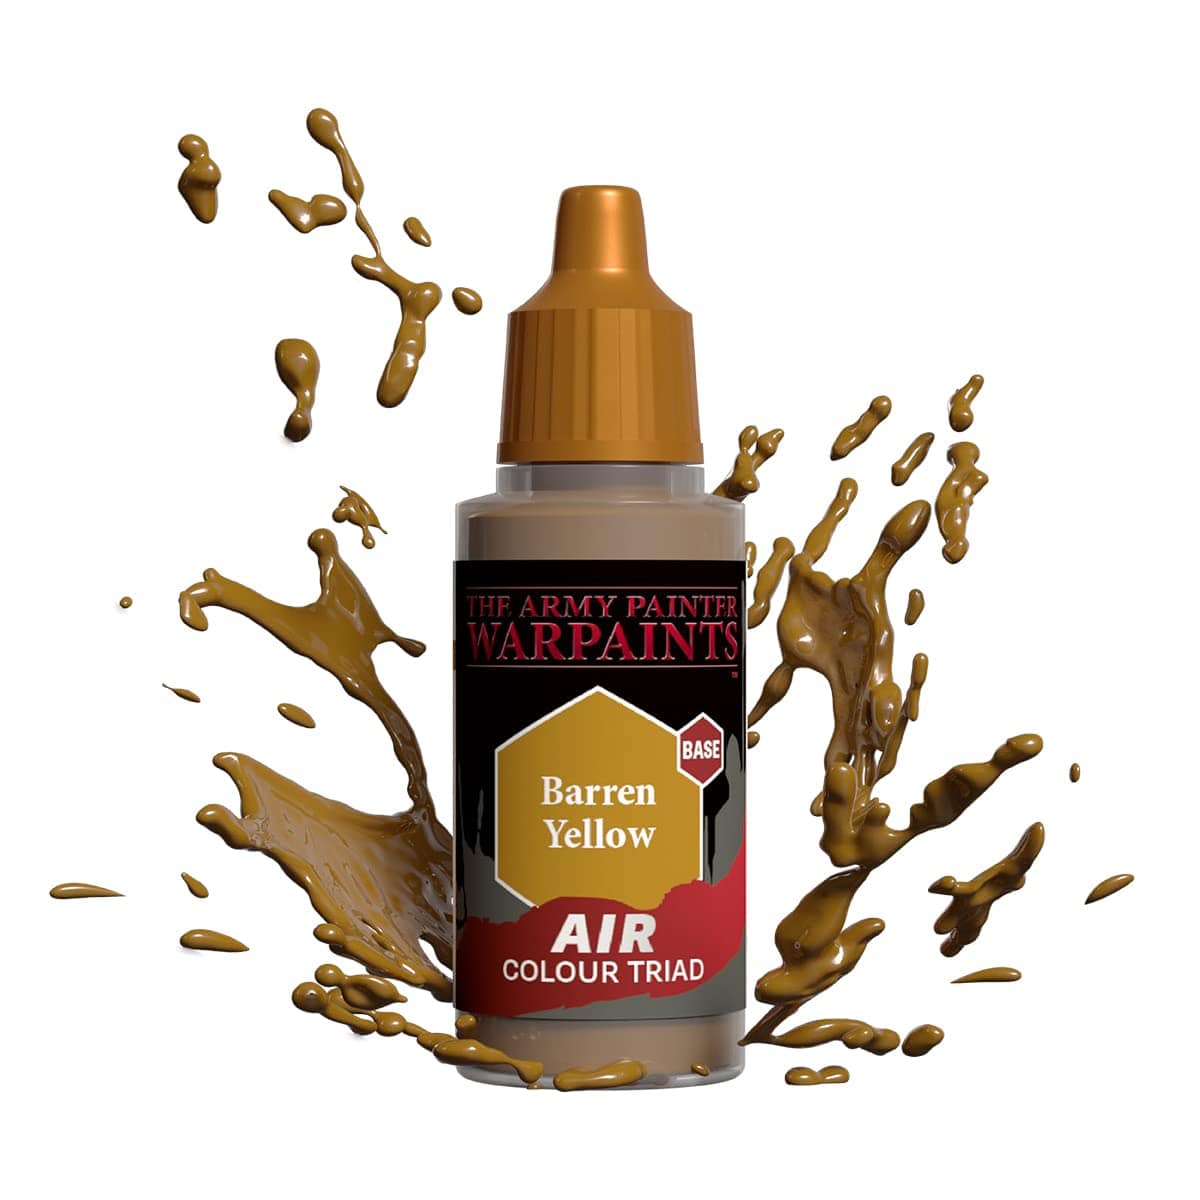 The Army Painter Accessories The Army Painter Warpaints Air: Barren Yellow 18ml